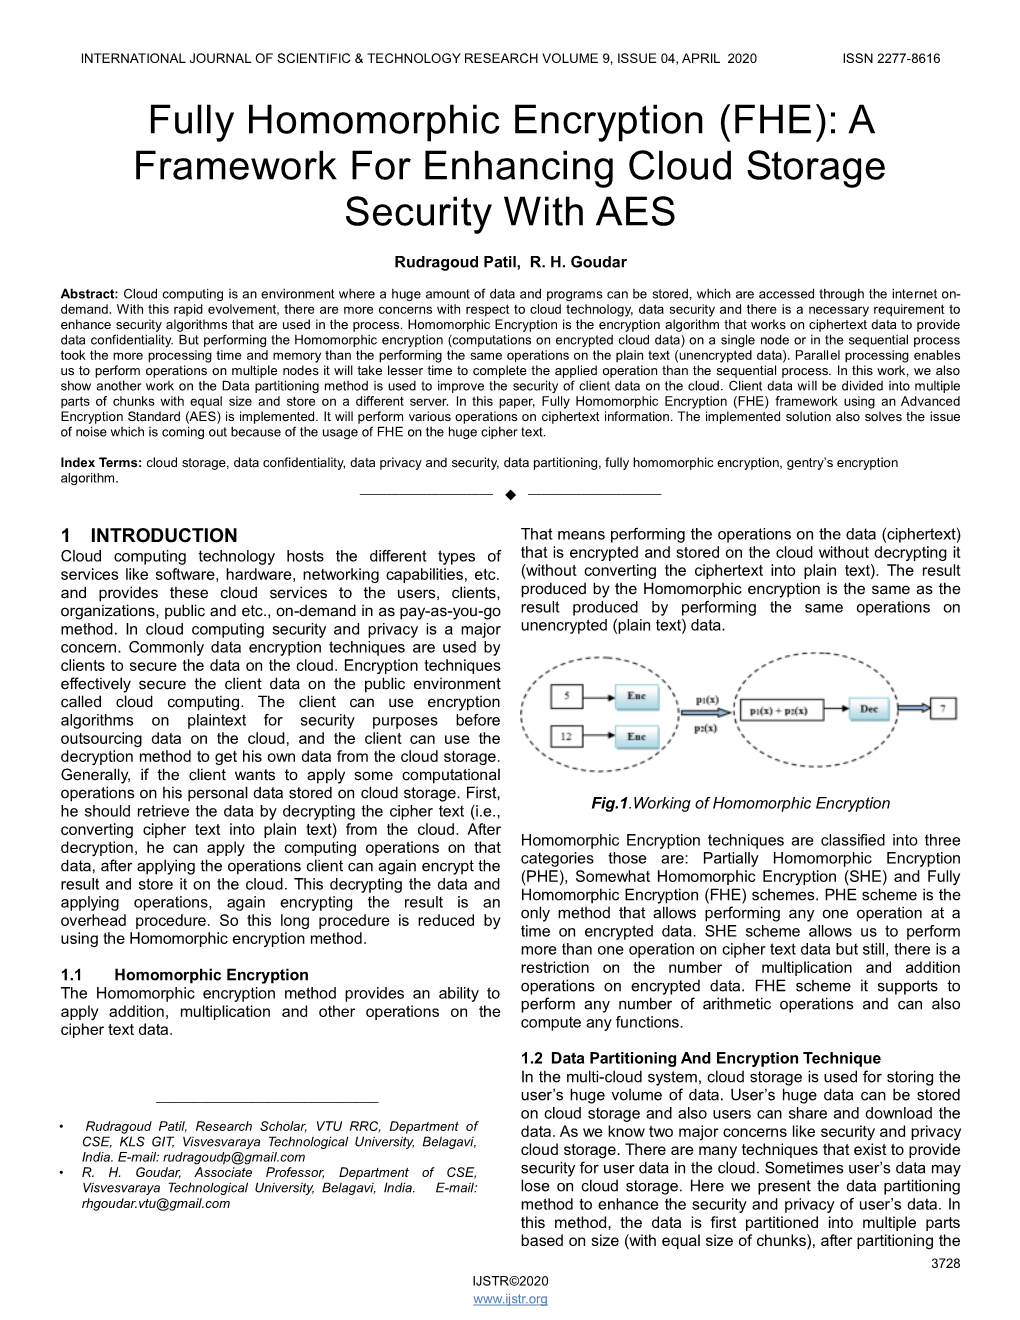 Fully Homomorphic Encryption (FHE): a Framework for Enhancing Cloud Storage Security with AES